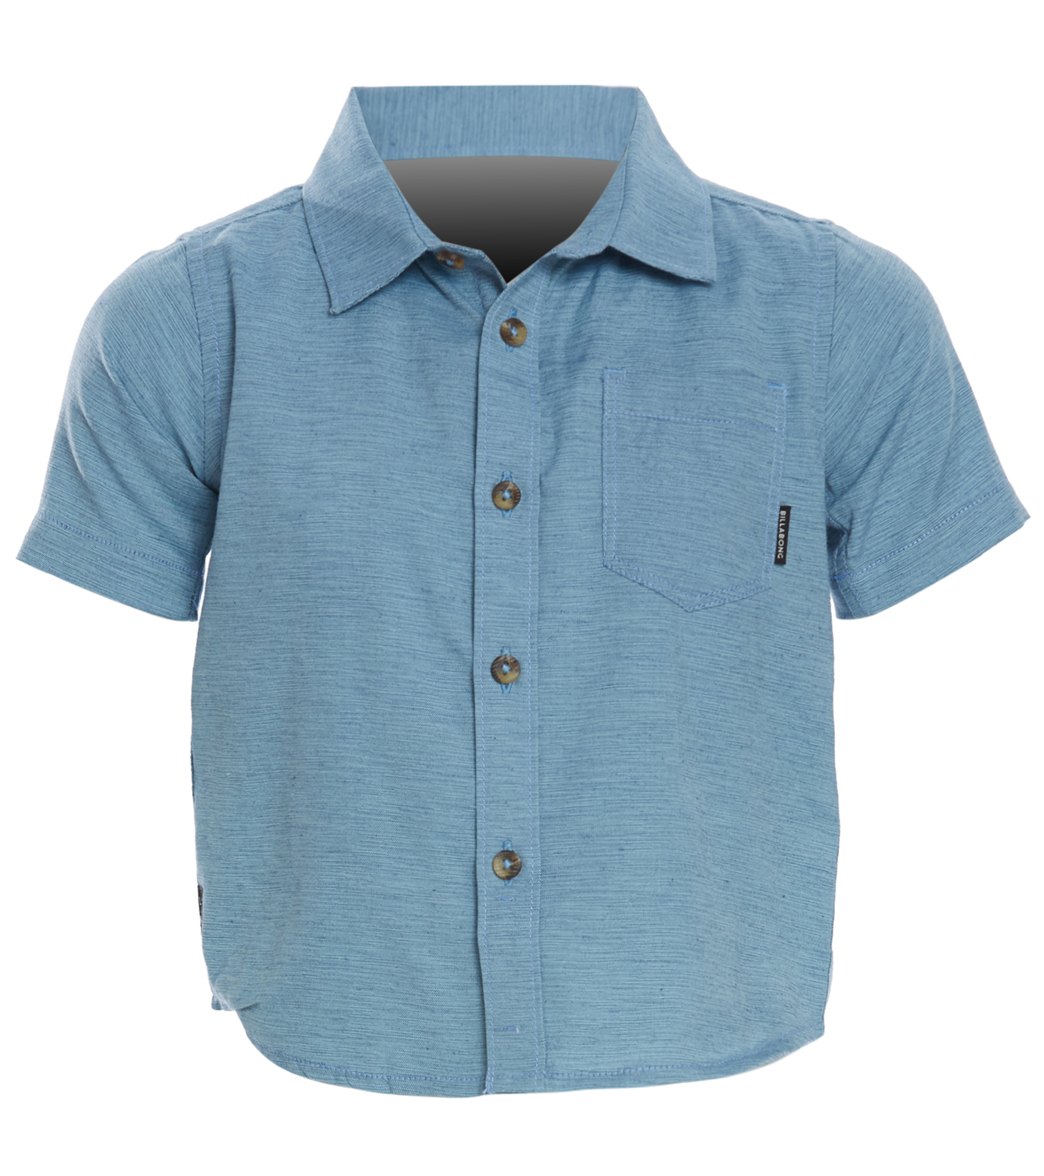 Billabong Boys' All Day Helix Short Sleeve Shirt Toddler Kid - Washed Blue 4S Cotton - Swimoutlet.com